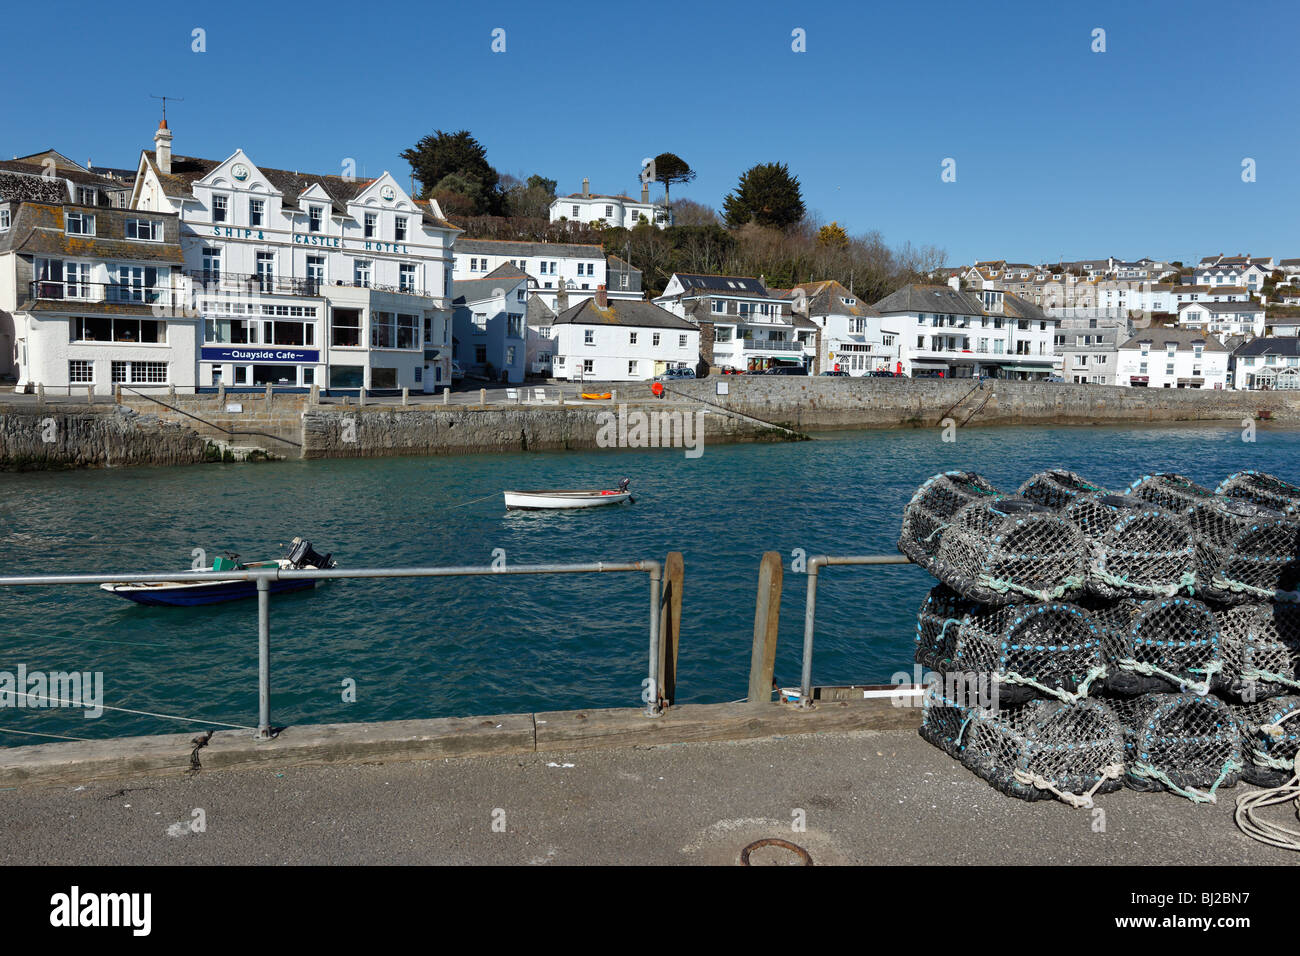 Lobster pots on the quay in St. Mawes, Cornwall UK. Stock Photo